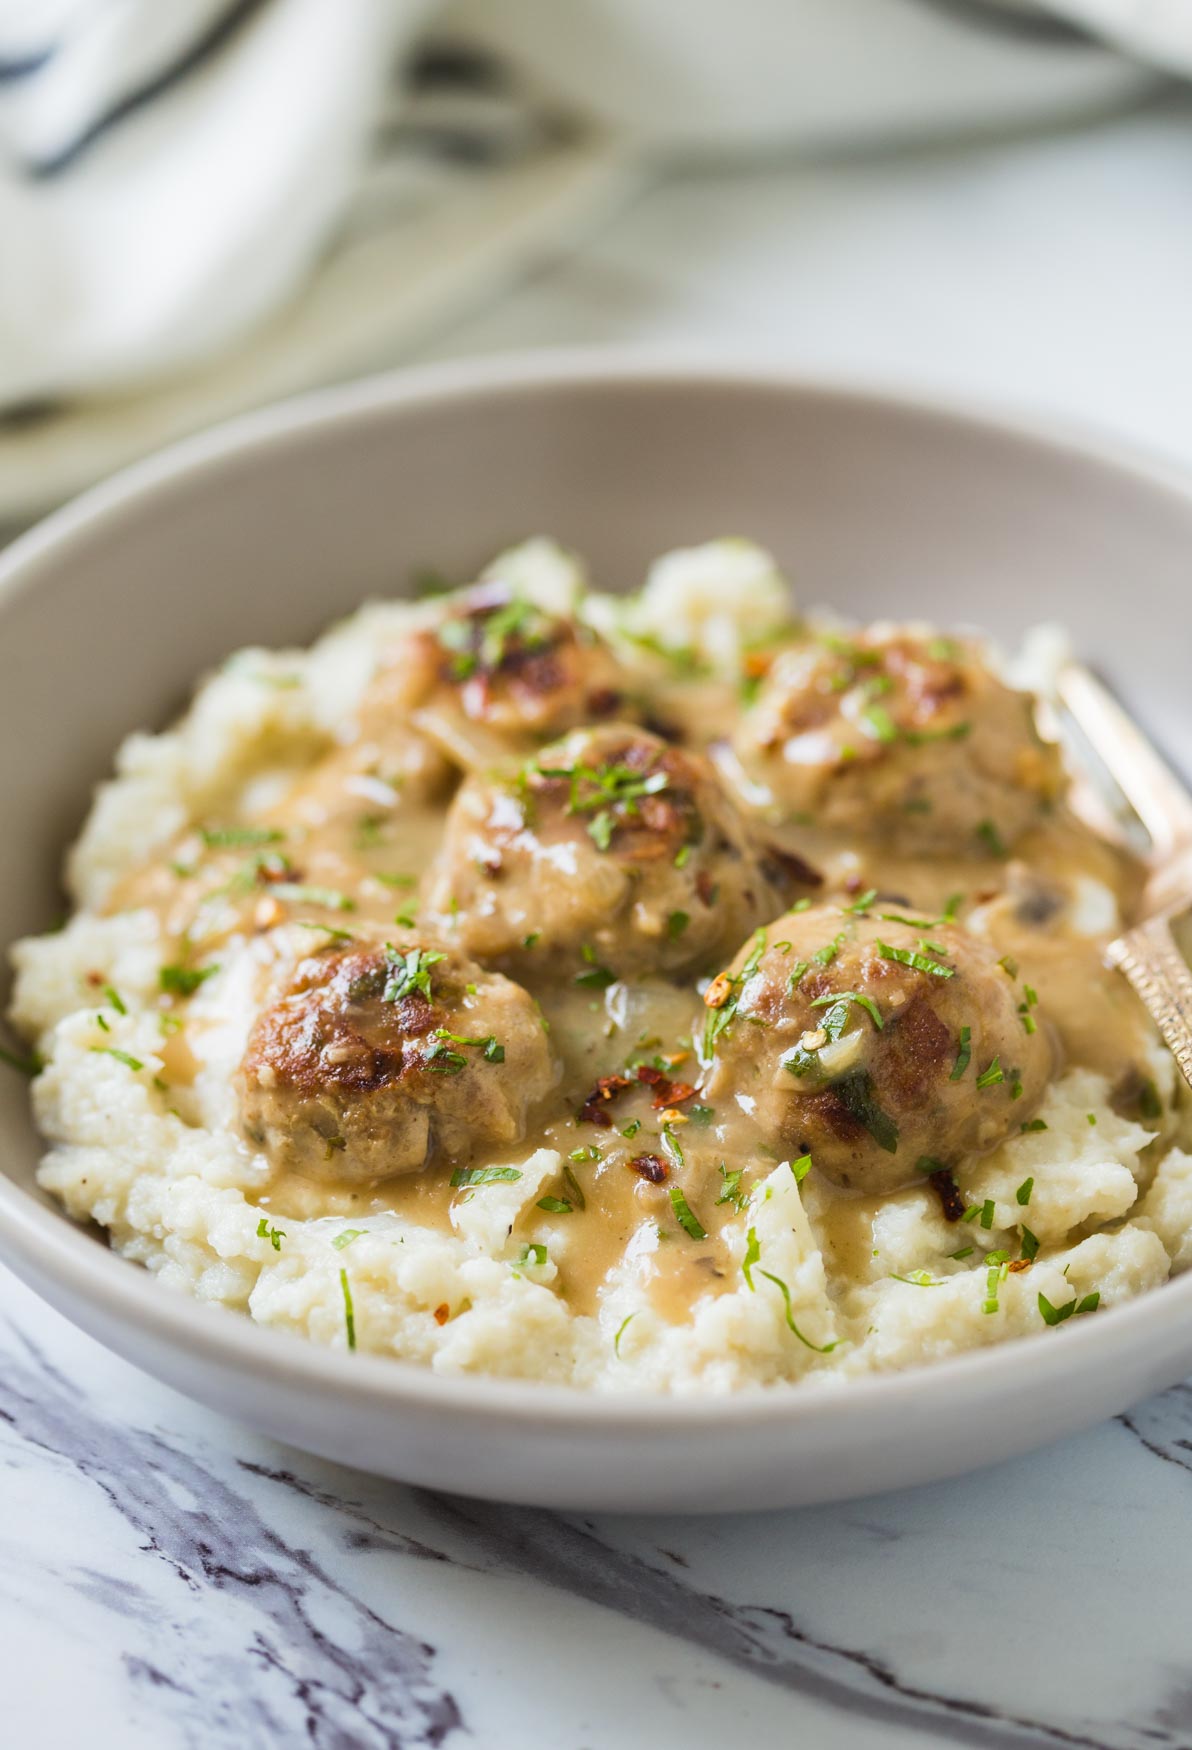 Healthy ground turkey meatballs with gravy and mashed cauliflower in a serving deep dish